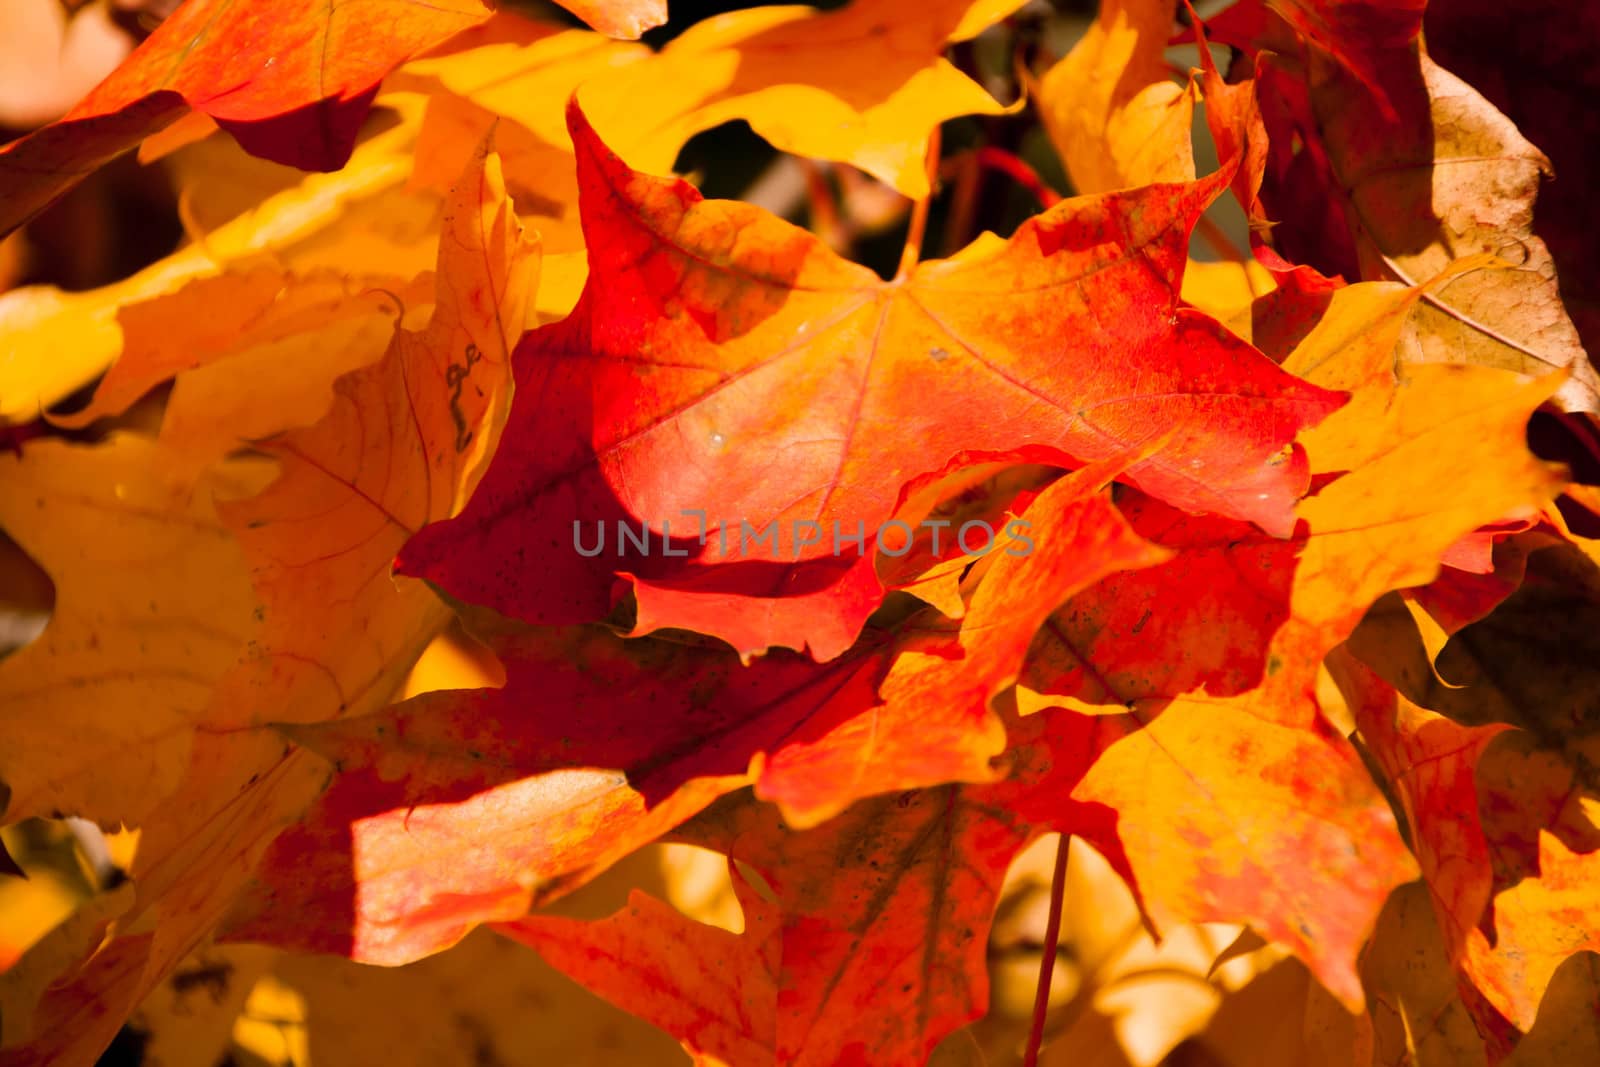 large orange and yellow maple leaves in autumn Sunny day on natural background